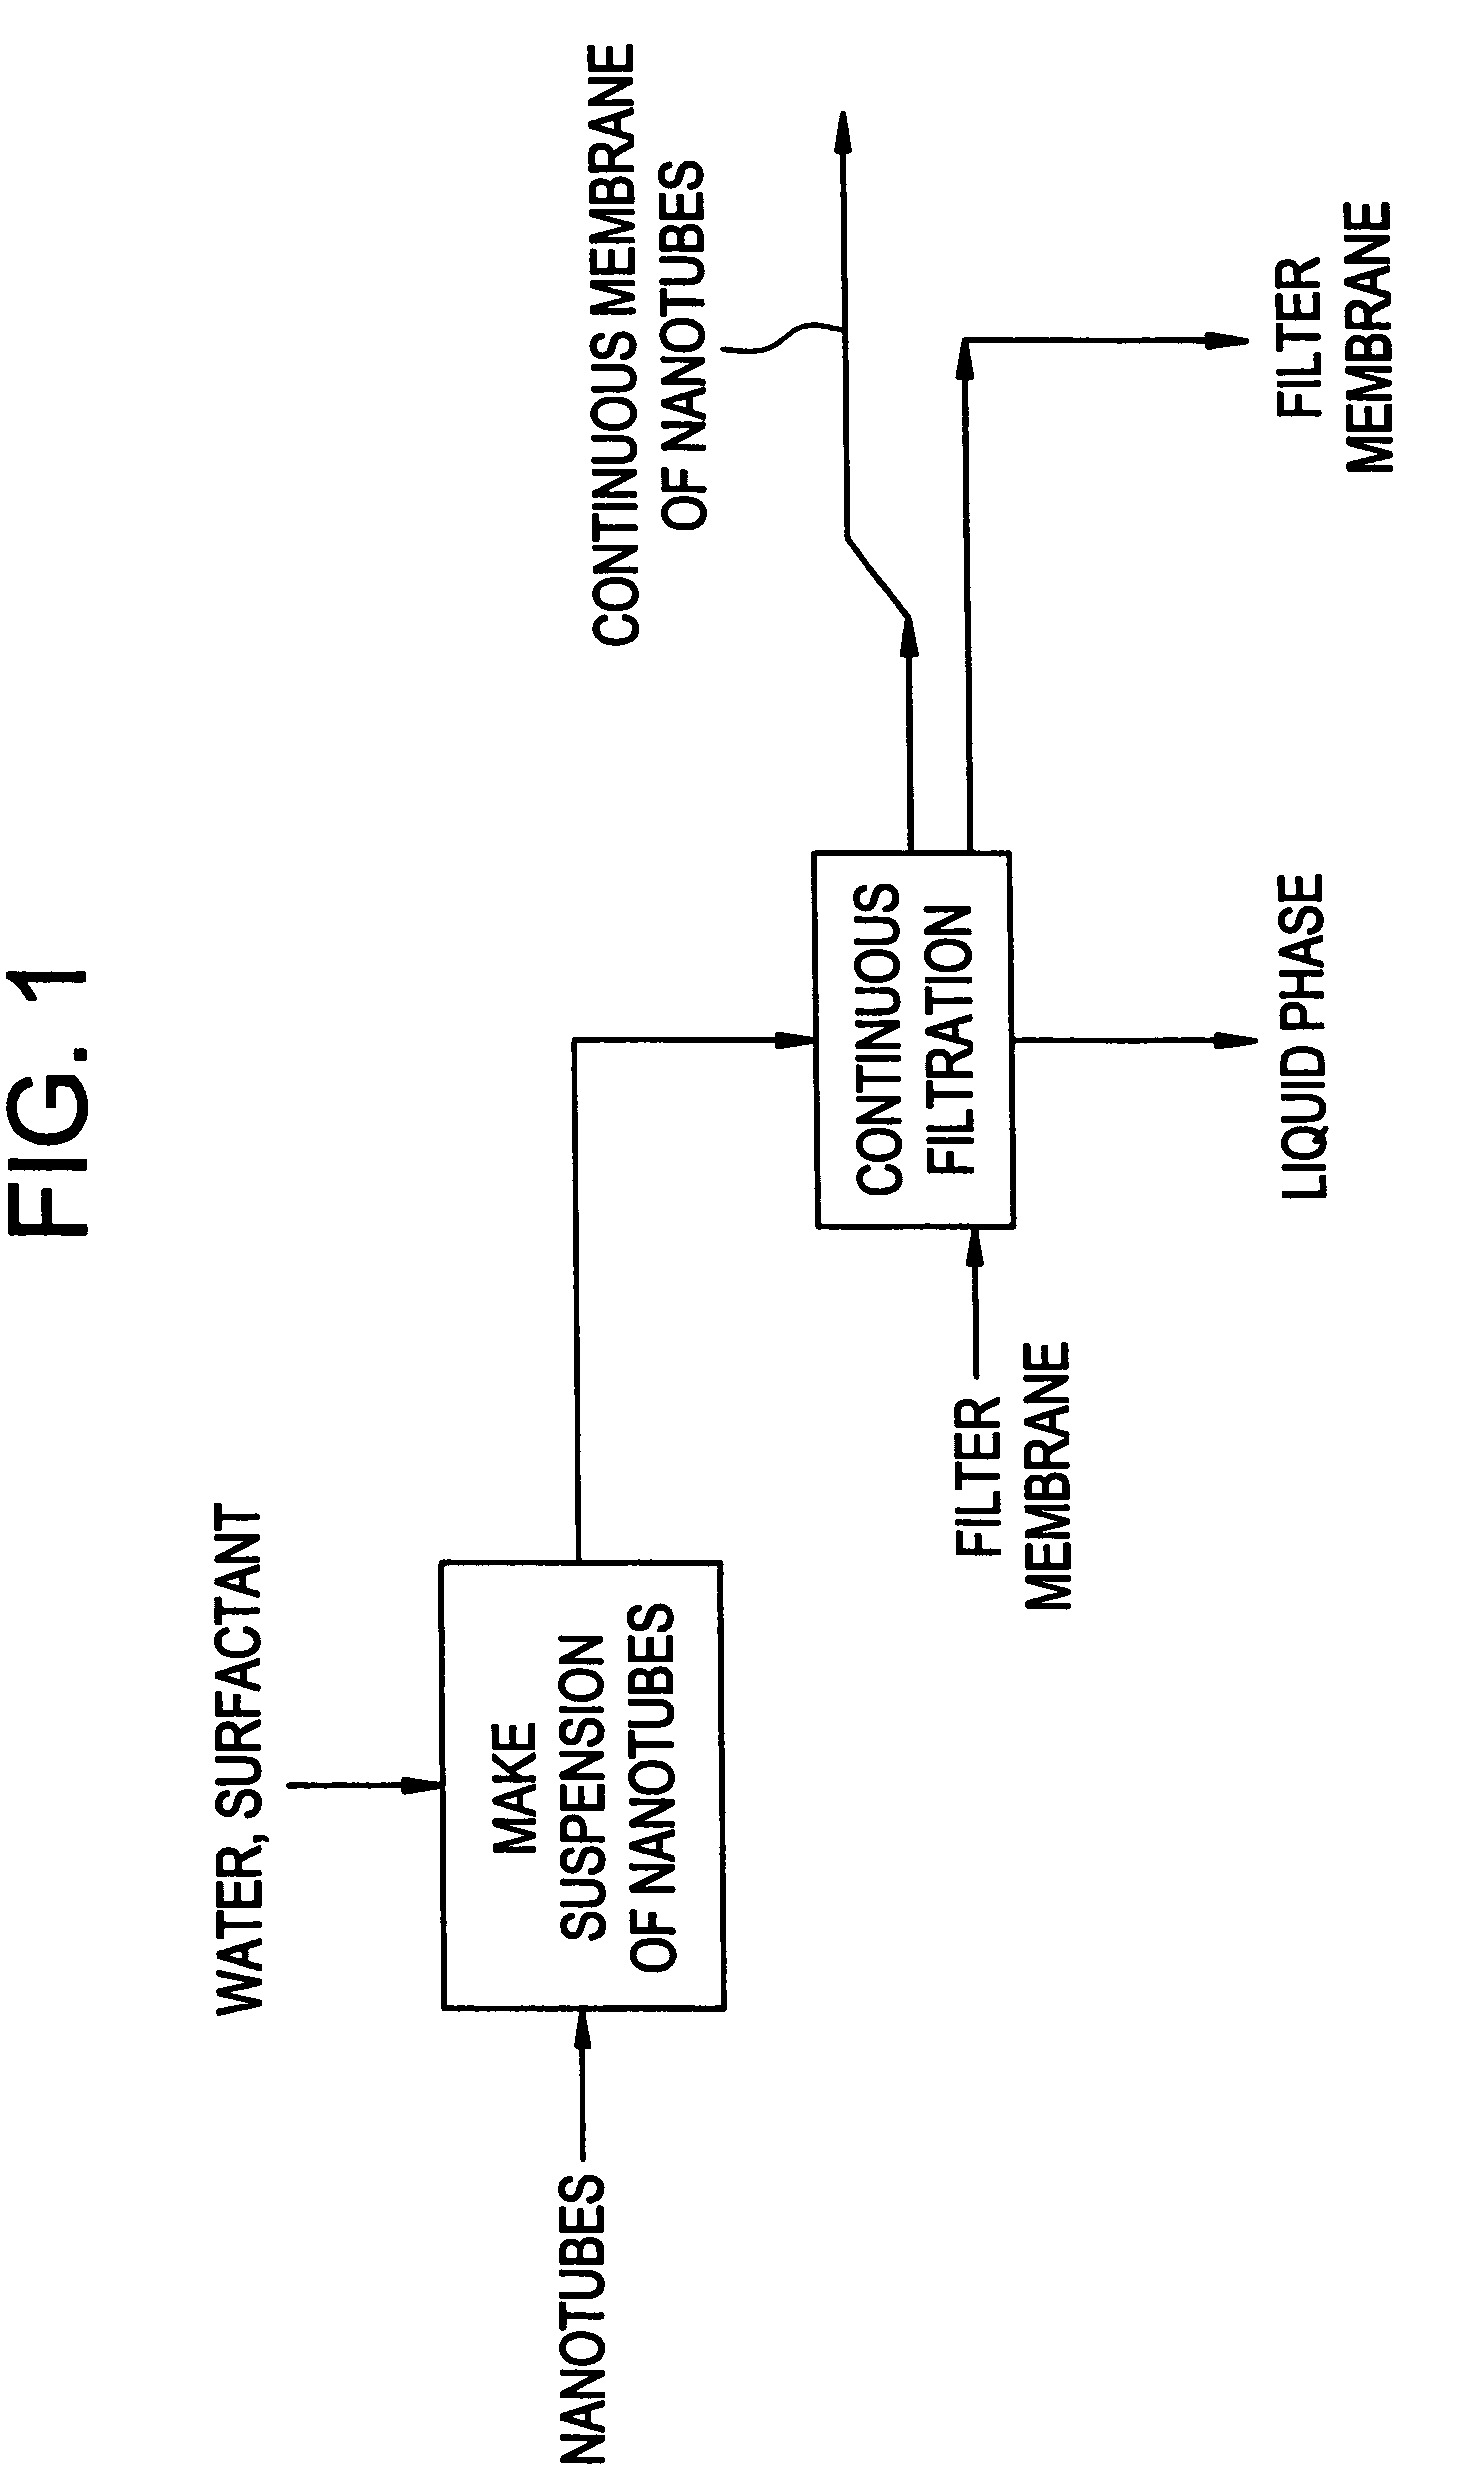 Method for continuous fabrication of carbon nanotube networks or membrane materials